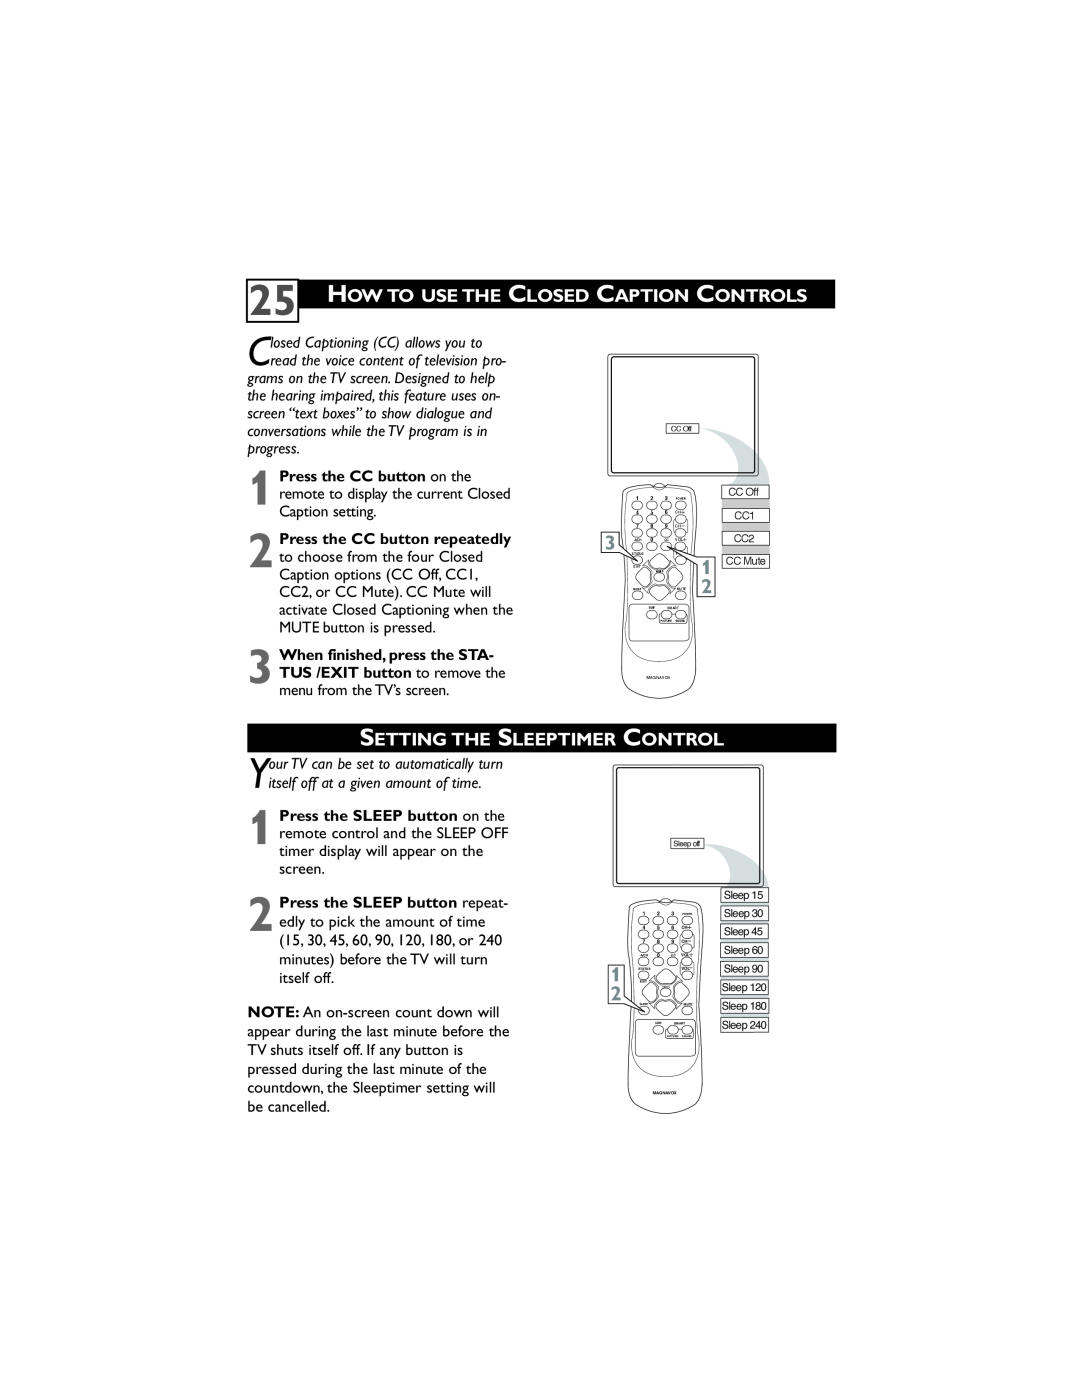 Magnavox 32MT3305/17 user manual How To Use The Closed Caption Controls, Setting The Sleeptimer Control 